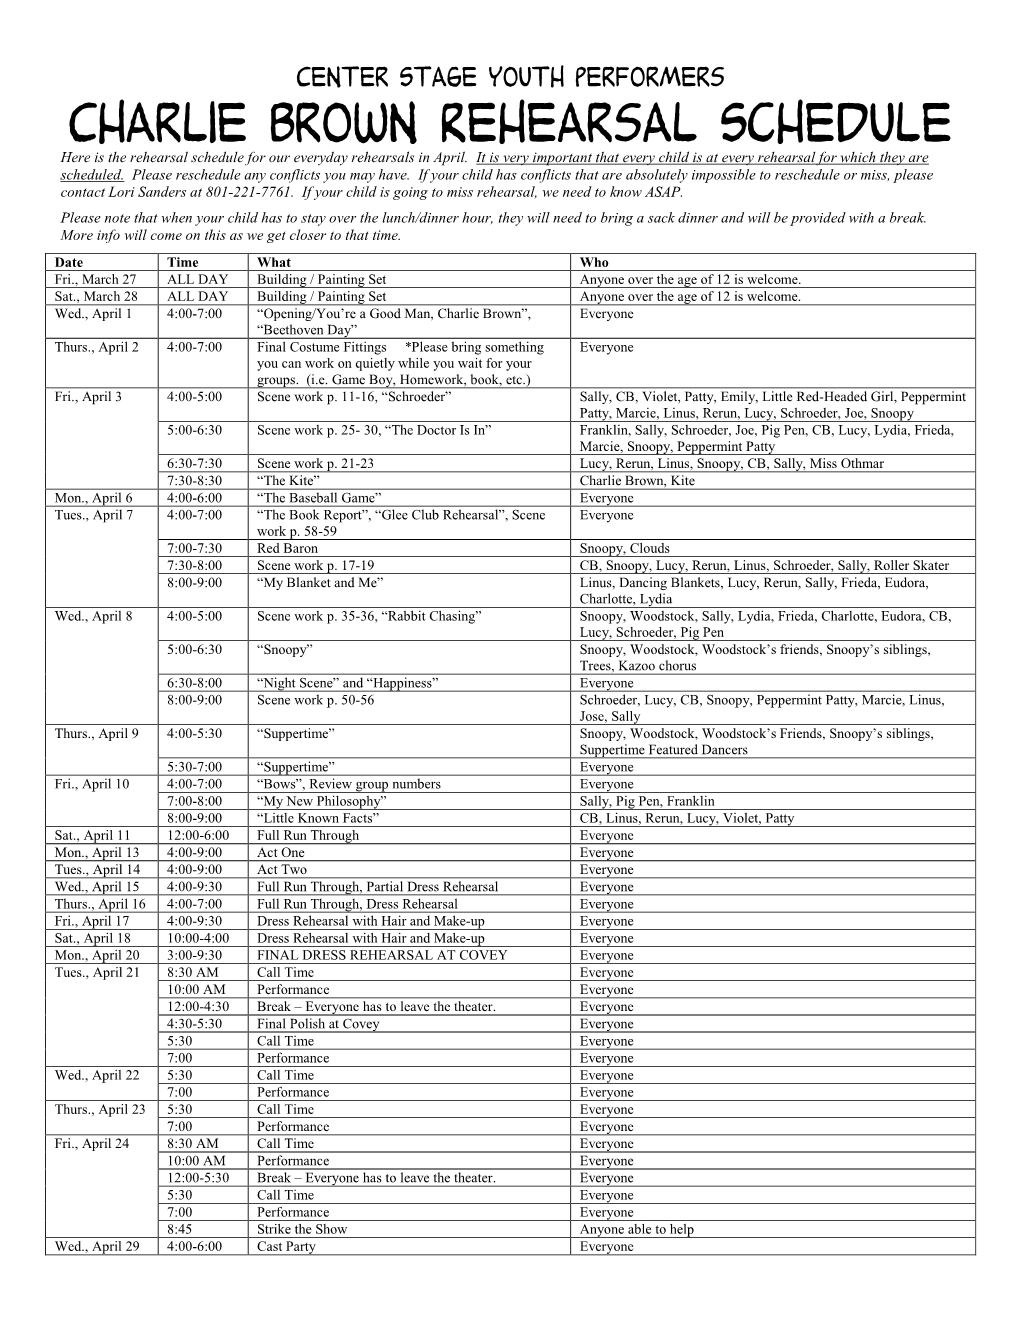 Charlie Brown Rehearsal Schedule Here Is the Rehearsal Schedule for Our Everyday Rehearsals in April